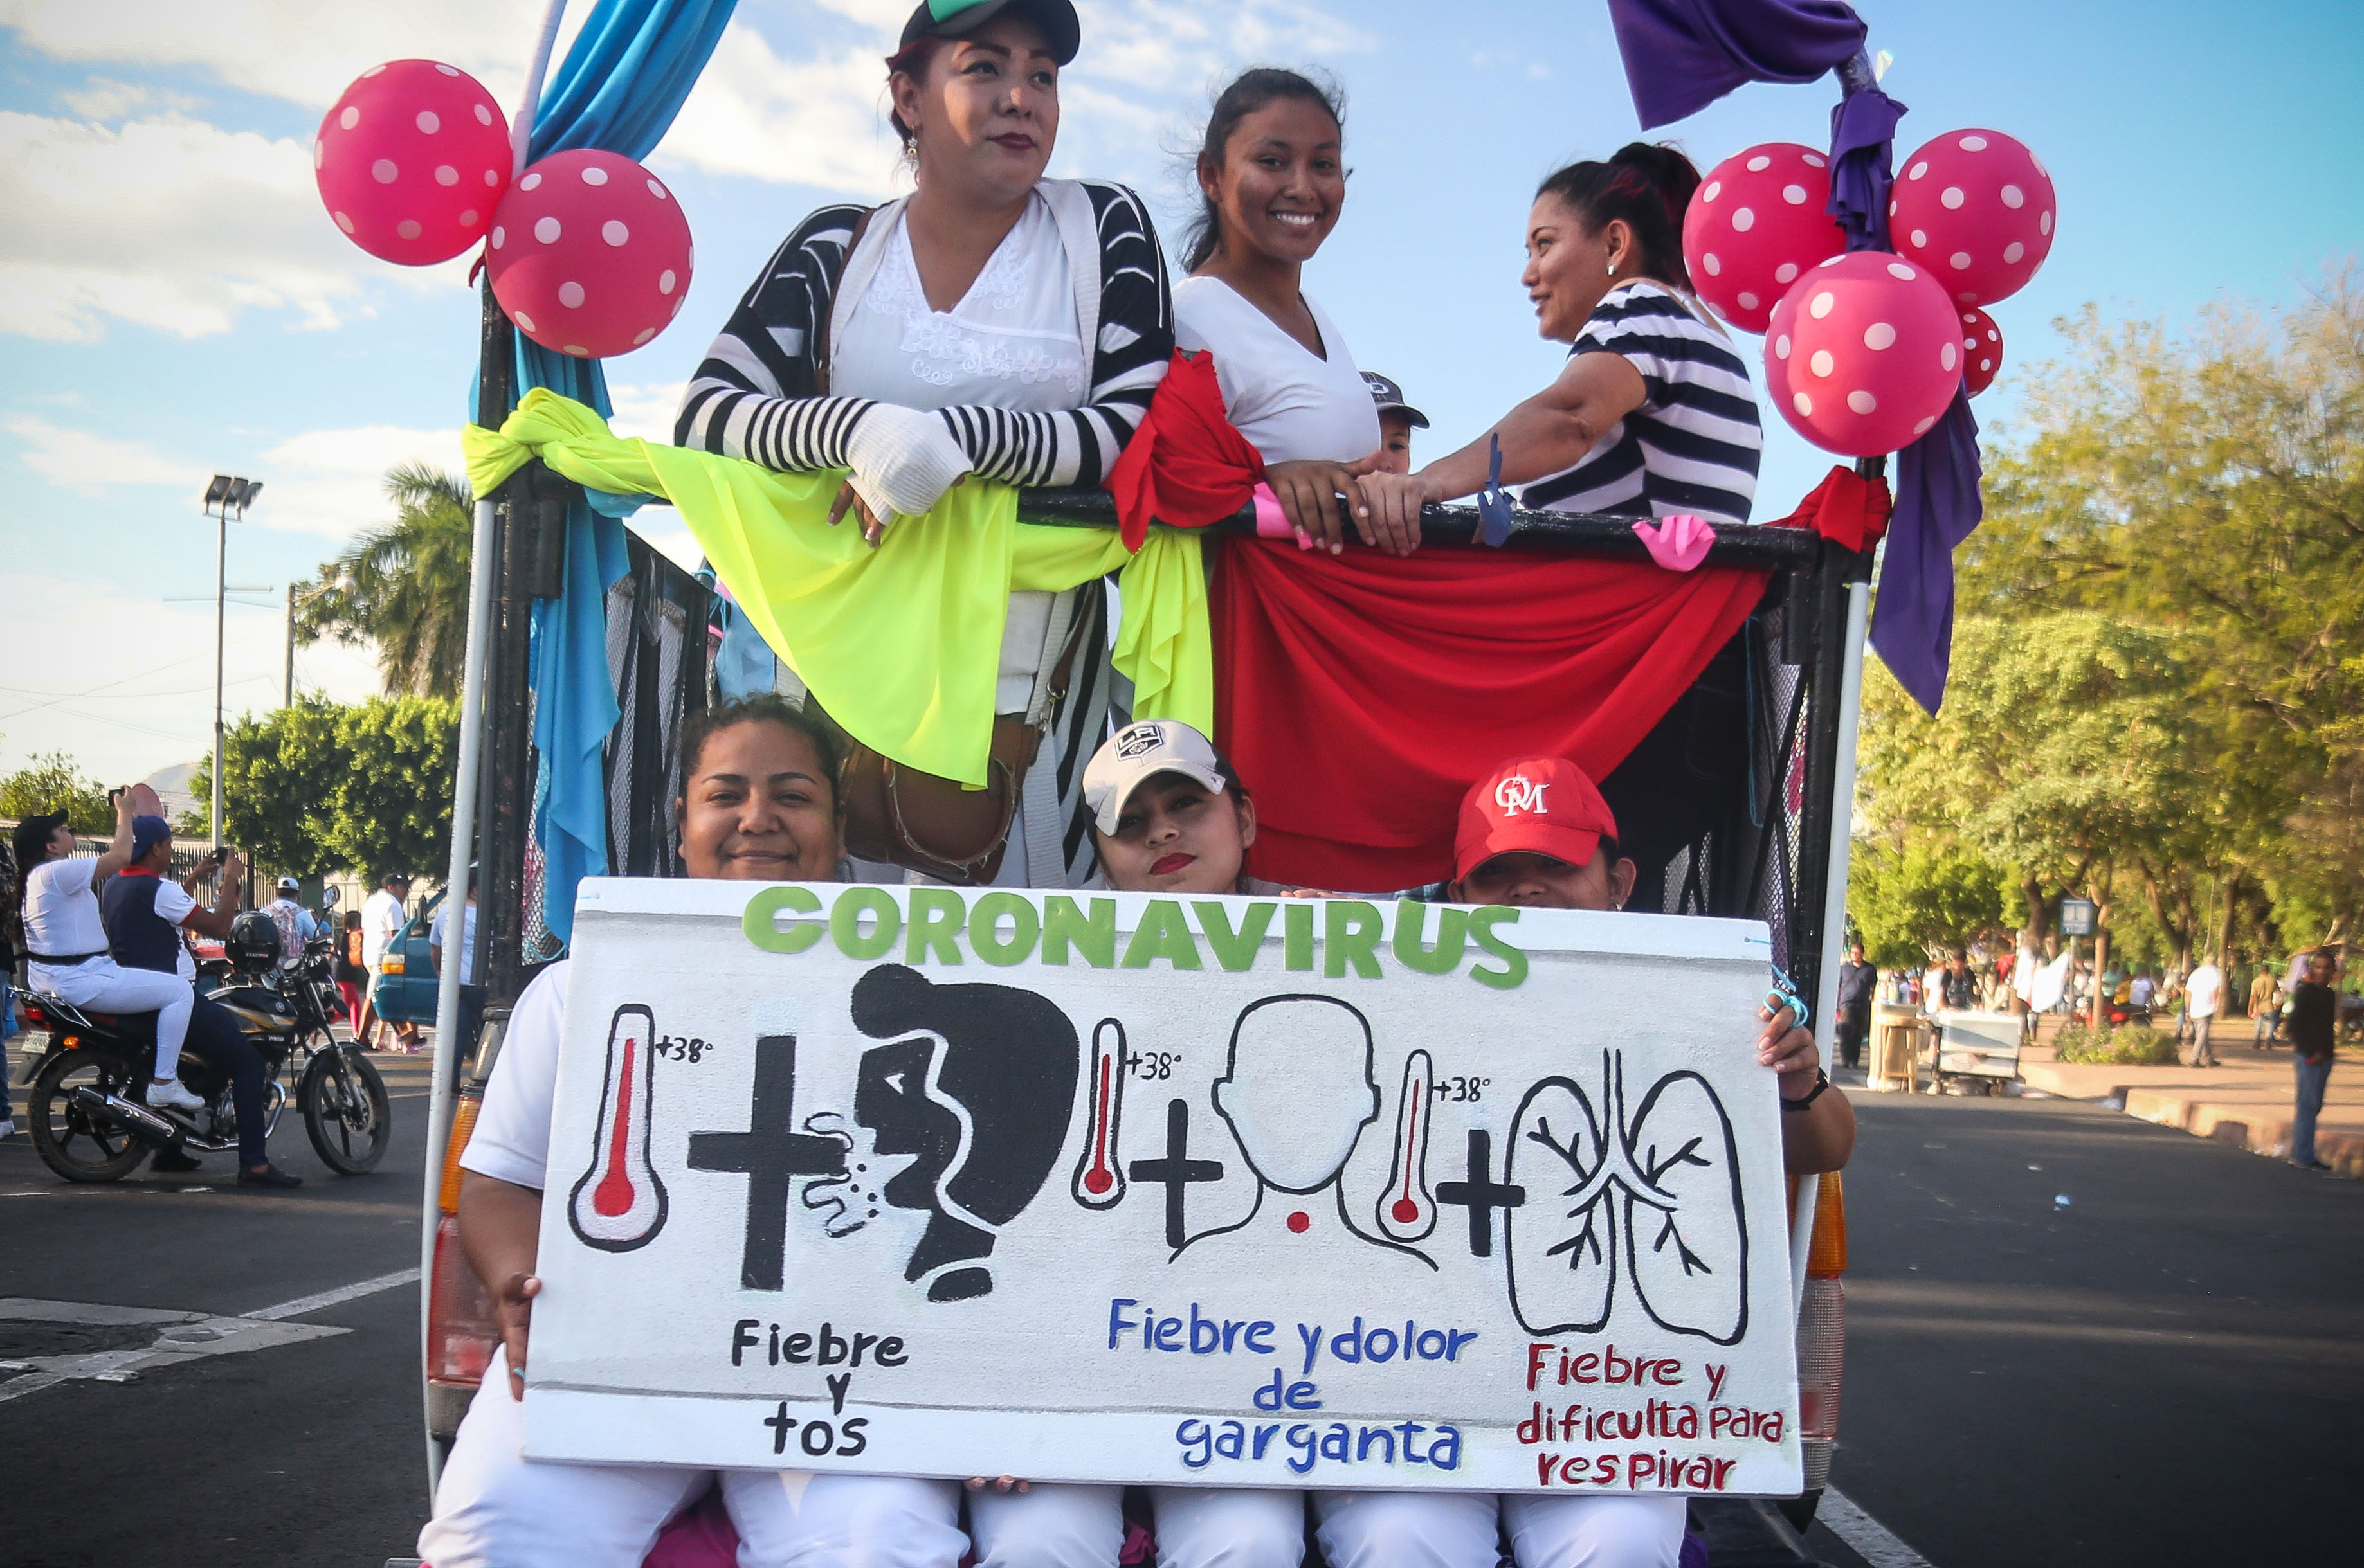 Supporters of Nicaraguan President Daniel Ortega take part in a demonstration called 'Love in times of COVID-19', in Managua on March 14, 2020.